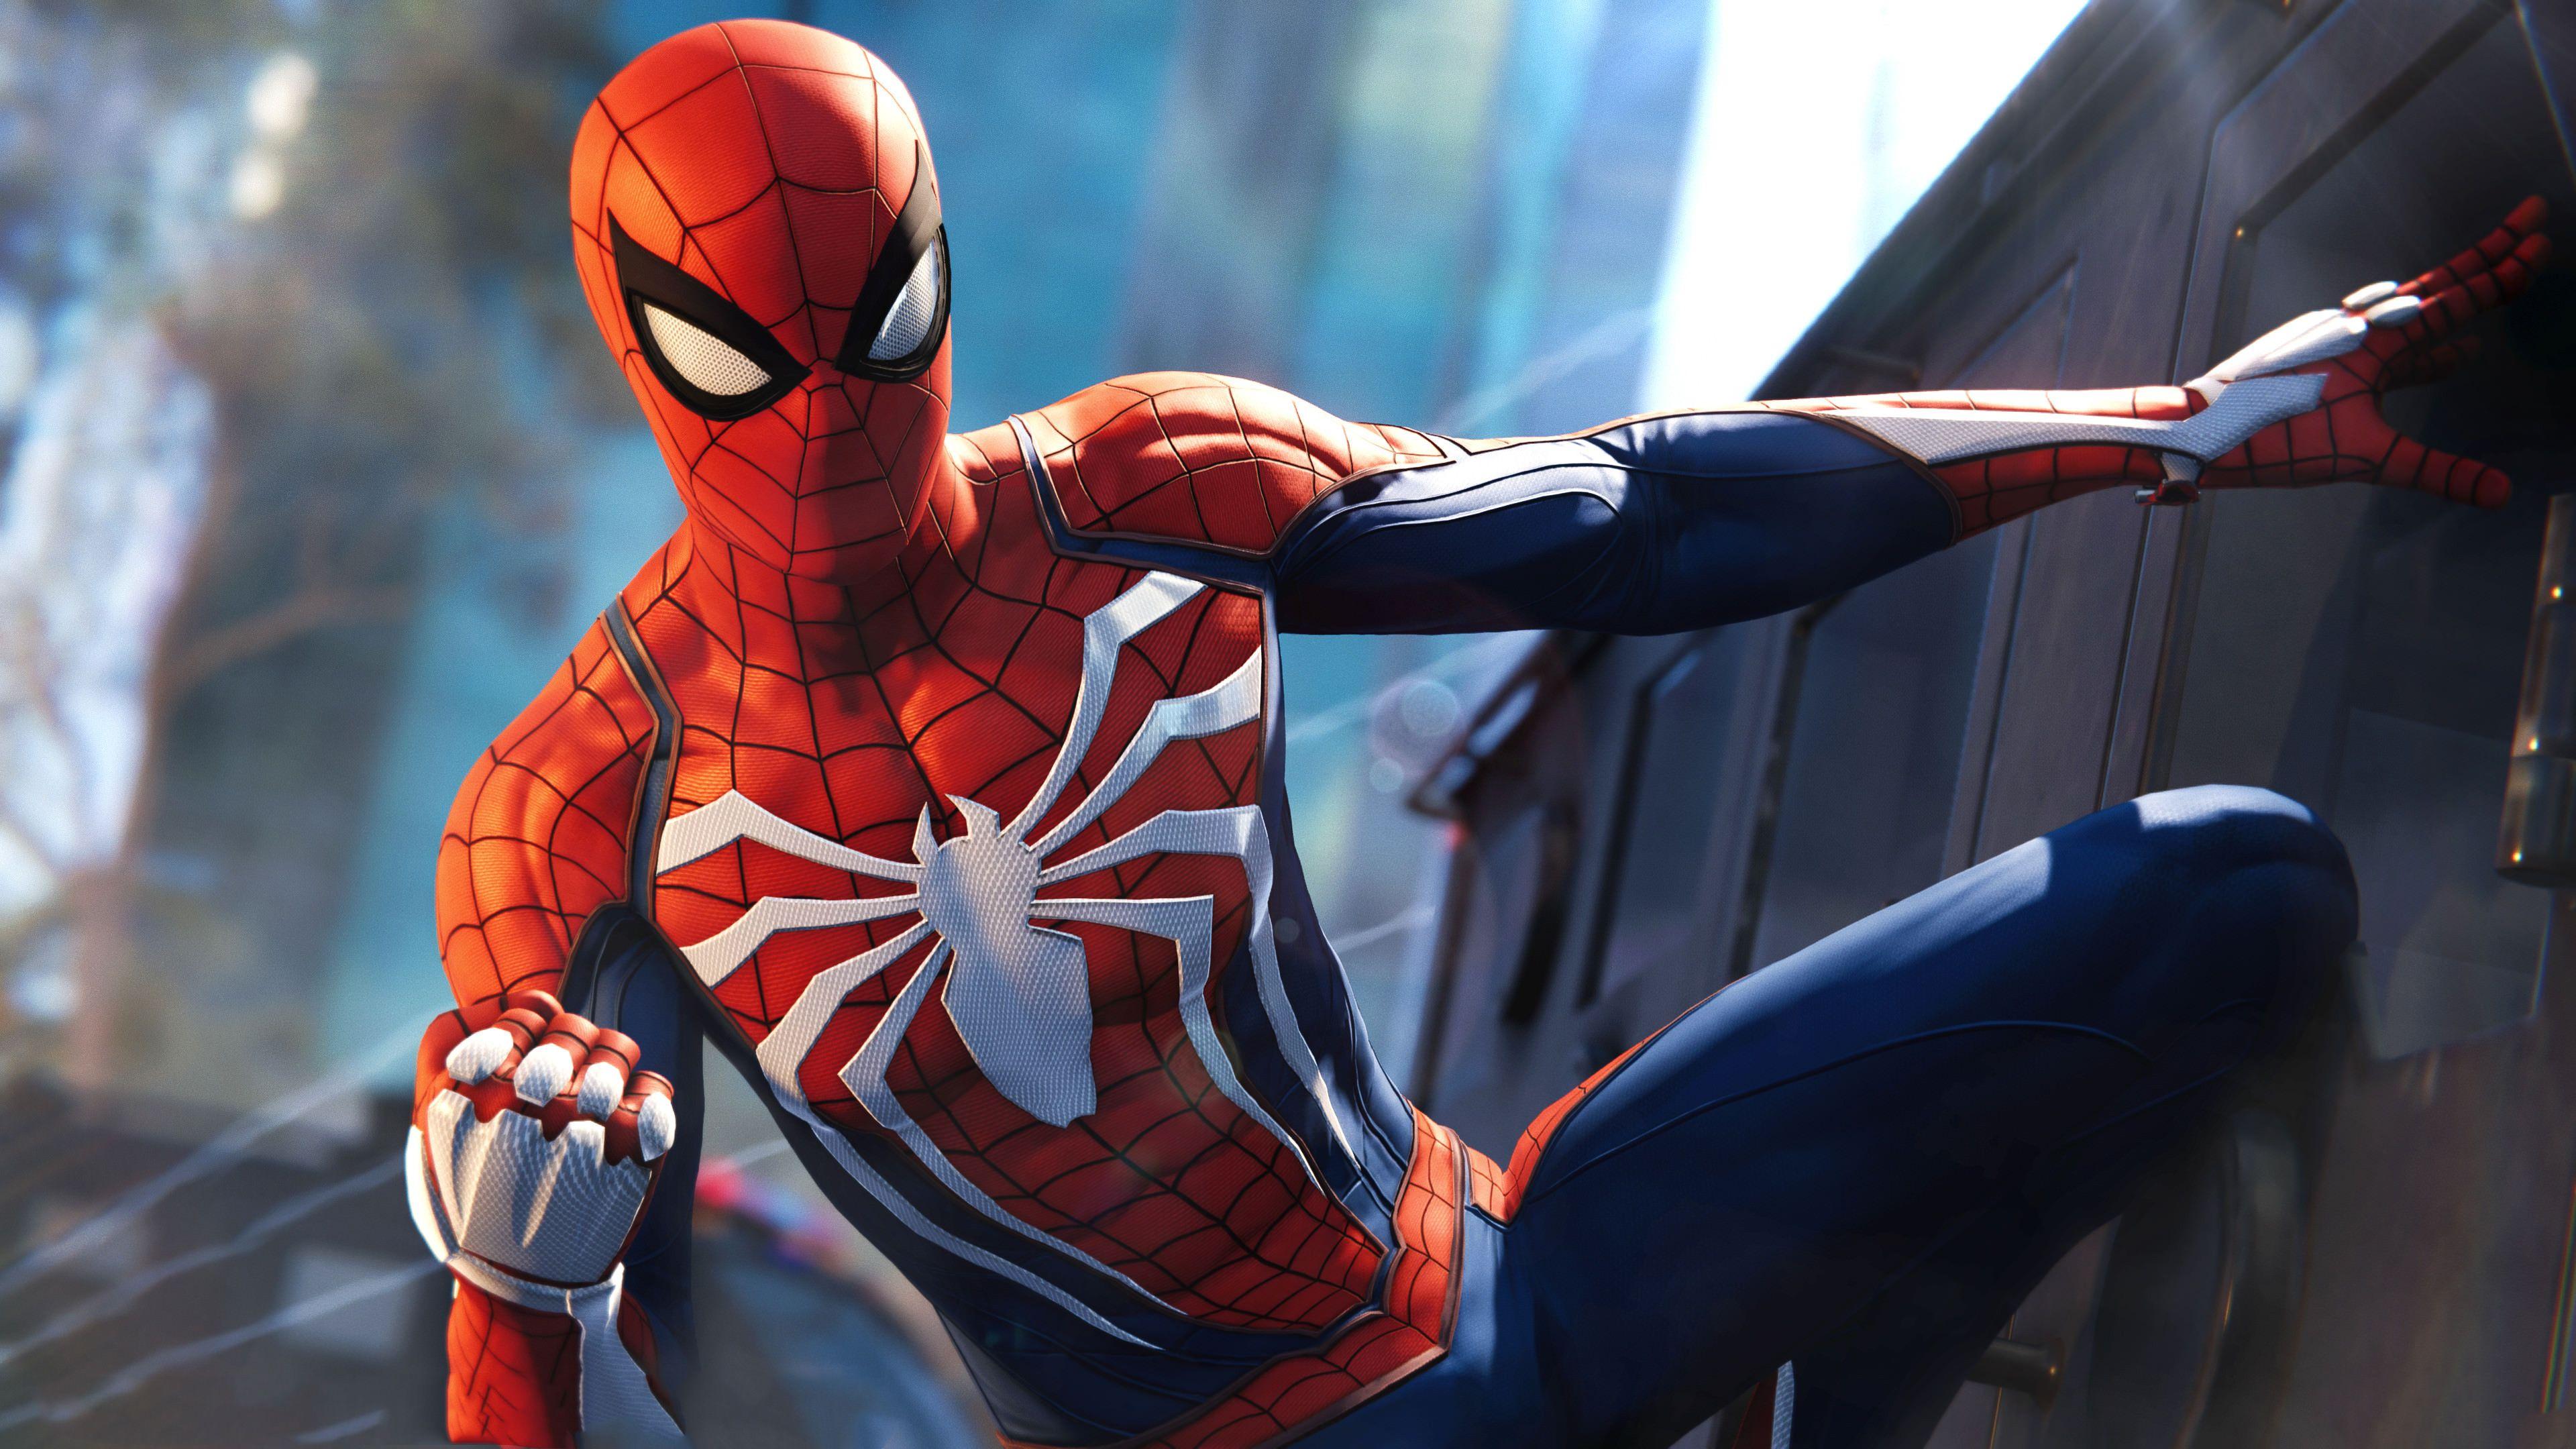 3840 x 2160 · jpeg - Spider-Man PlayStation 4 Wallpapers - Top Free Spider-Man PlayStation 4 ...